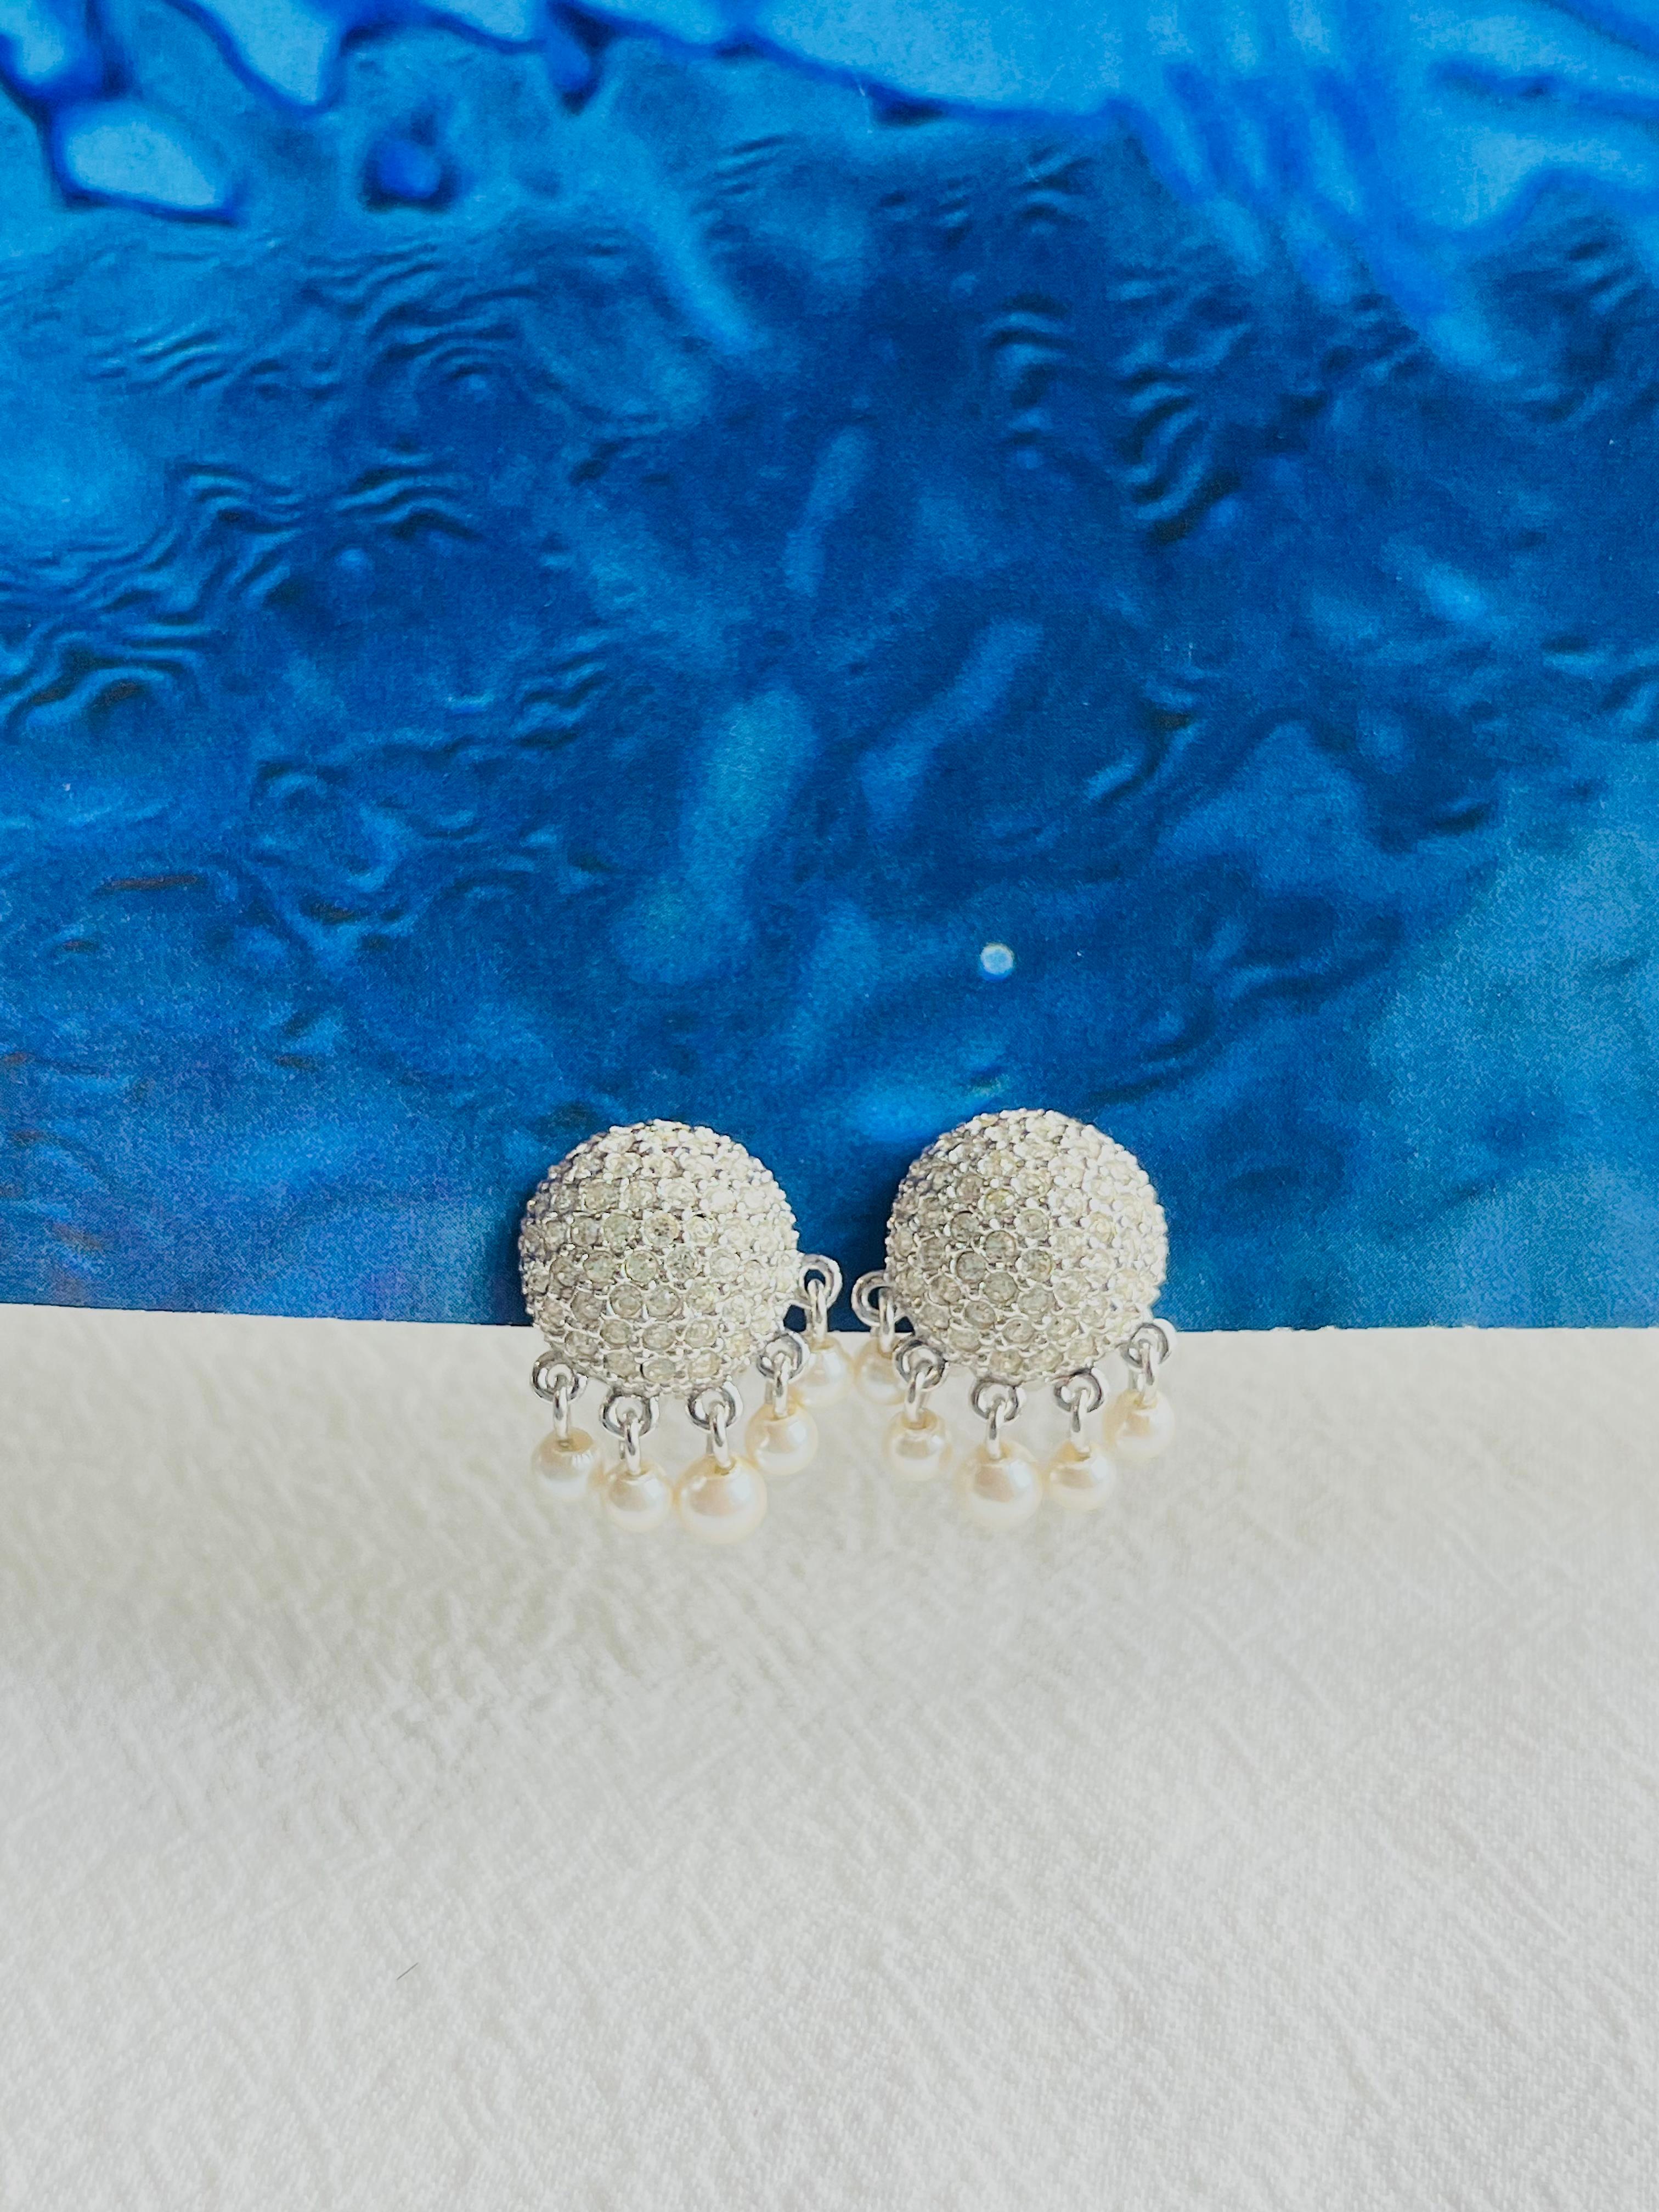 Christian Dior Vintage 1980s Whole Crystals Round Tassel Pearls Clip Earrings, Silver Tone

Excellent condition. Very new. All crystals are shining. 100% genuine. 

A very beautiful pair of clip on earrings by Chr. DIOR, signed at the back.

Size: